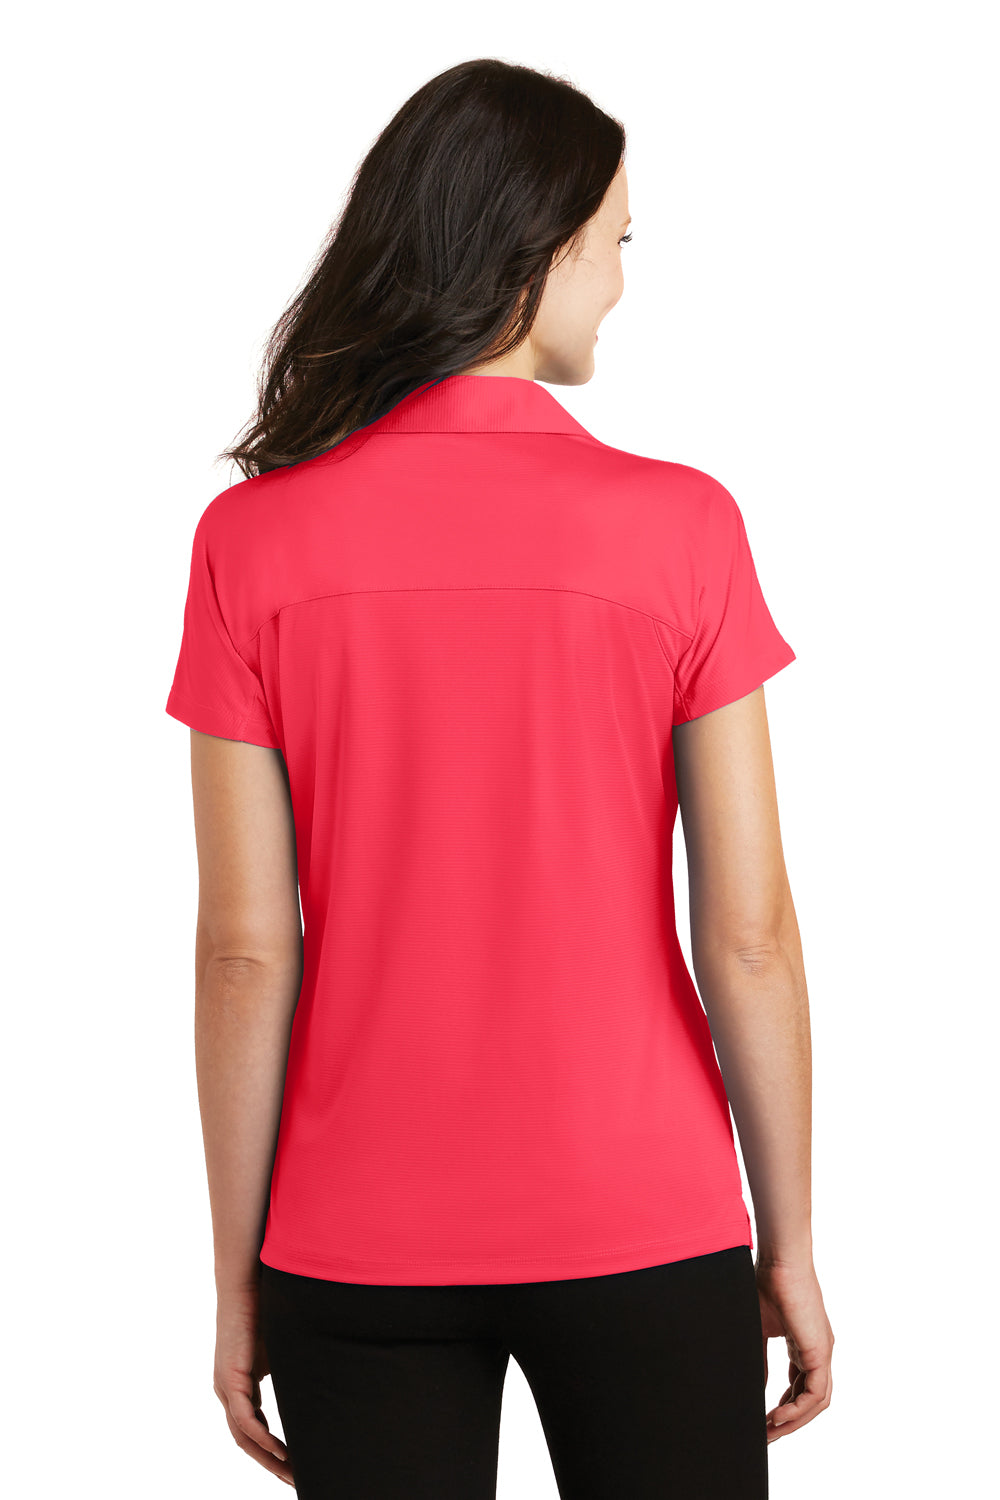 Port Authority L575 Womens Crossover Moisture Wicking Short Sleeve Polo Shirt Hibiscus Pink Back